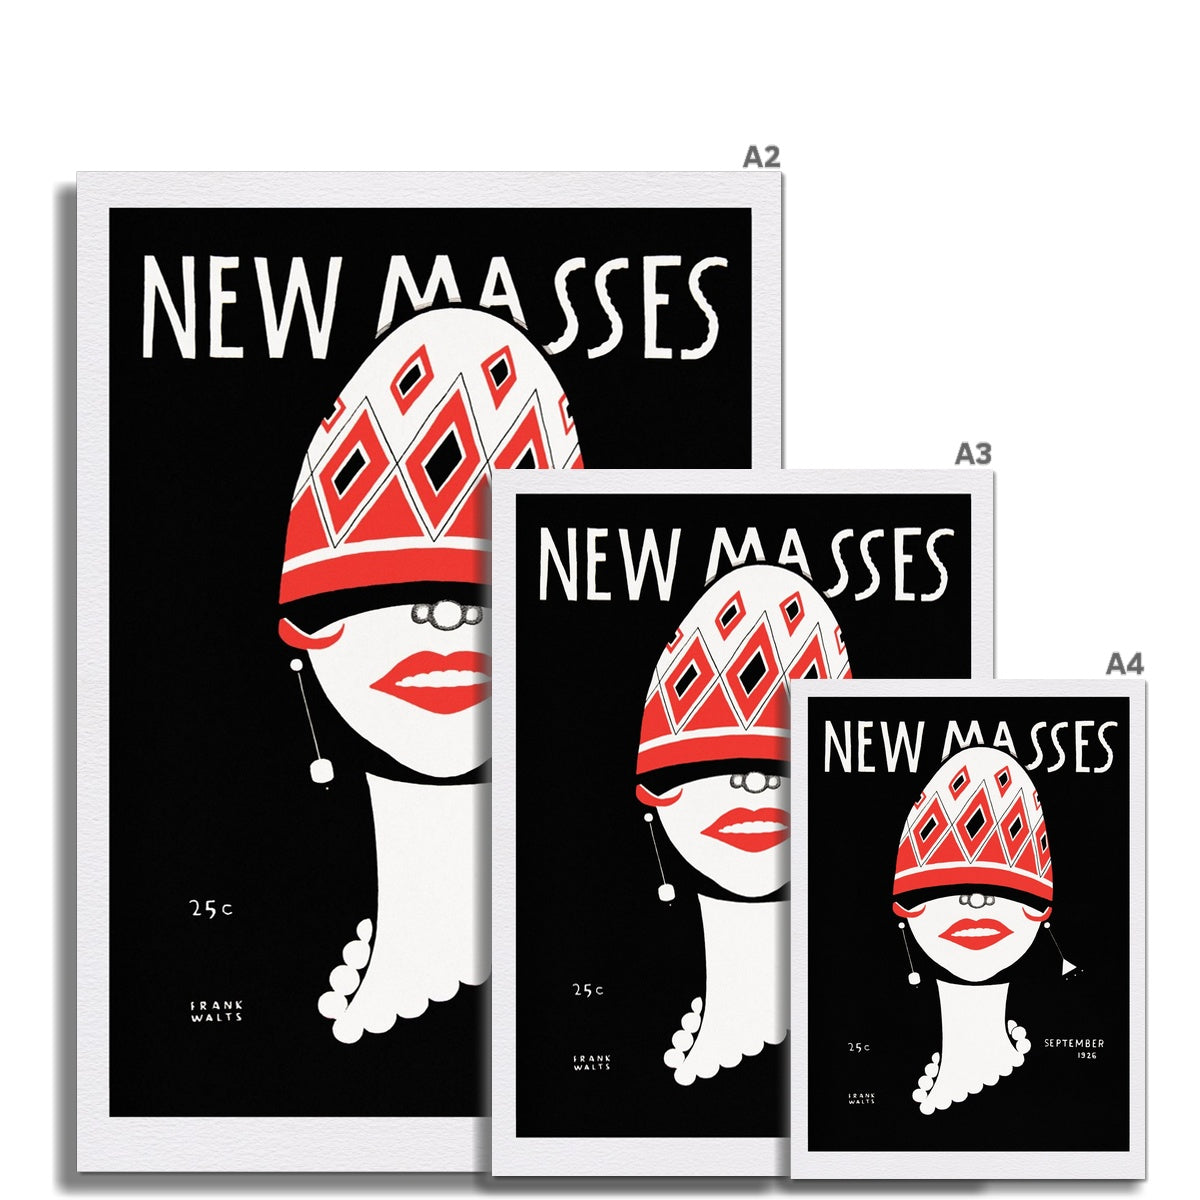 ModeAbode vintage giclee print in 3 sizes A4, A3 A2 prints